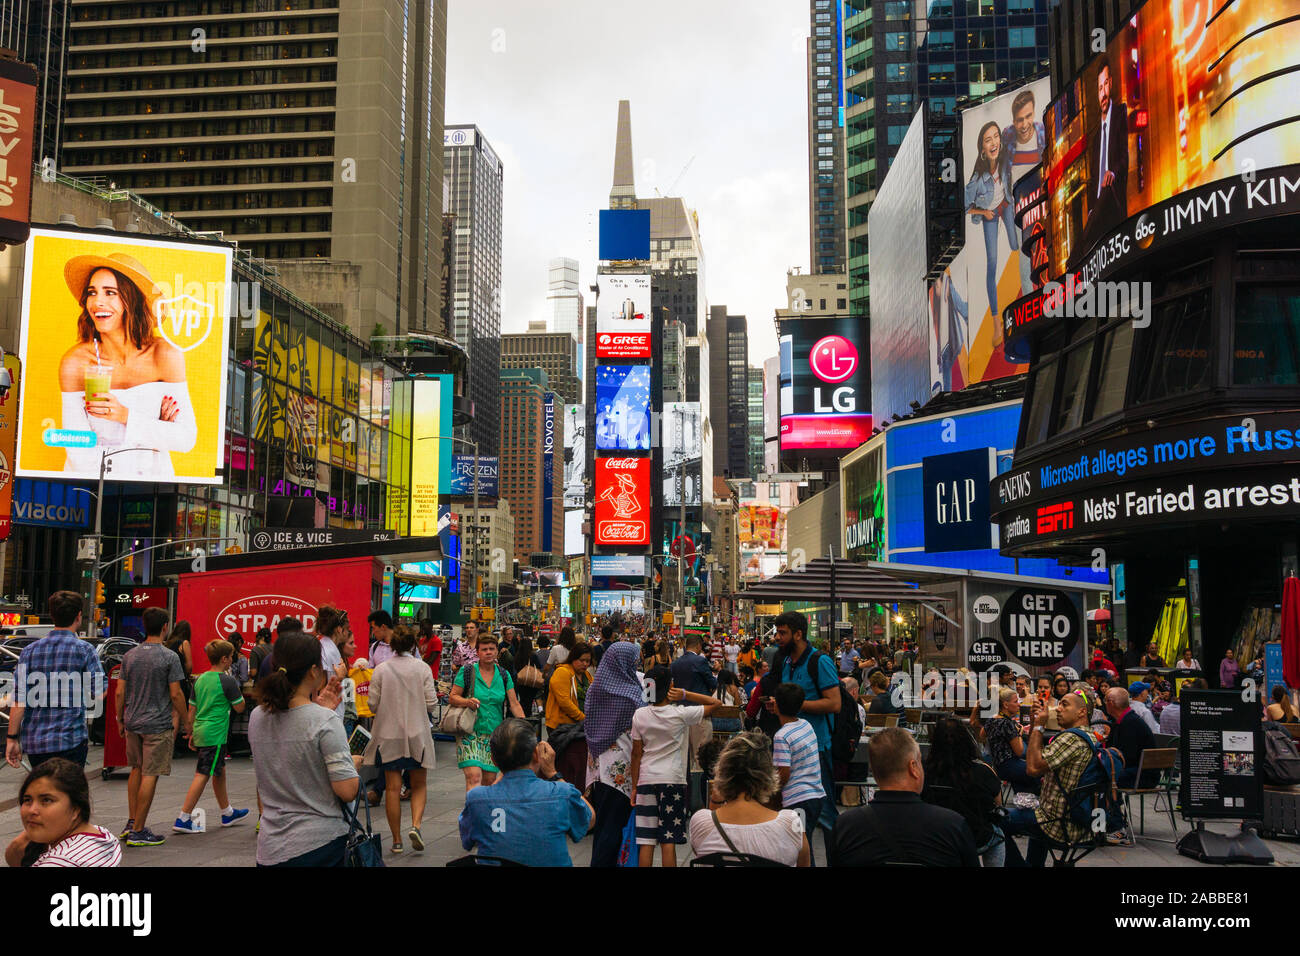 New York, USA - aug 20, 2018: Tourists in Times Square in the evening. More than 50 million people visit New York every year. Stock Photo